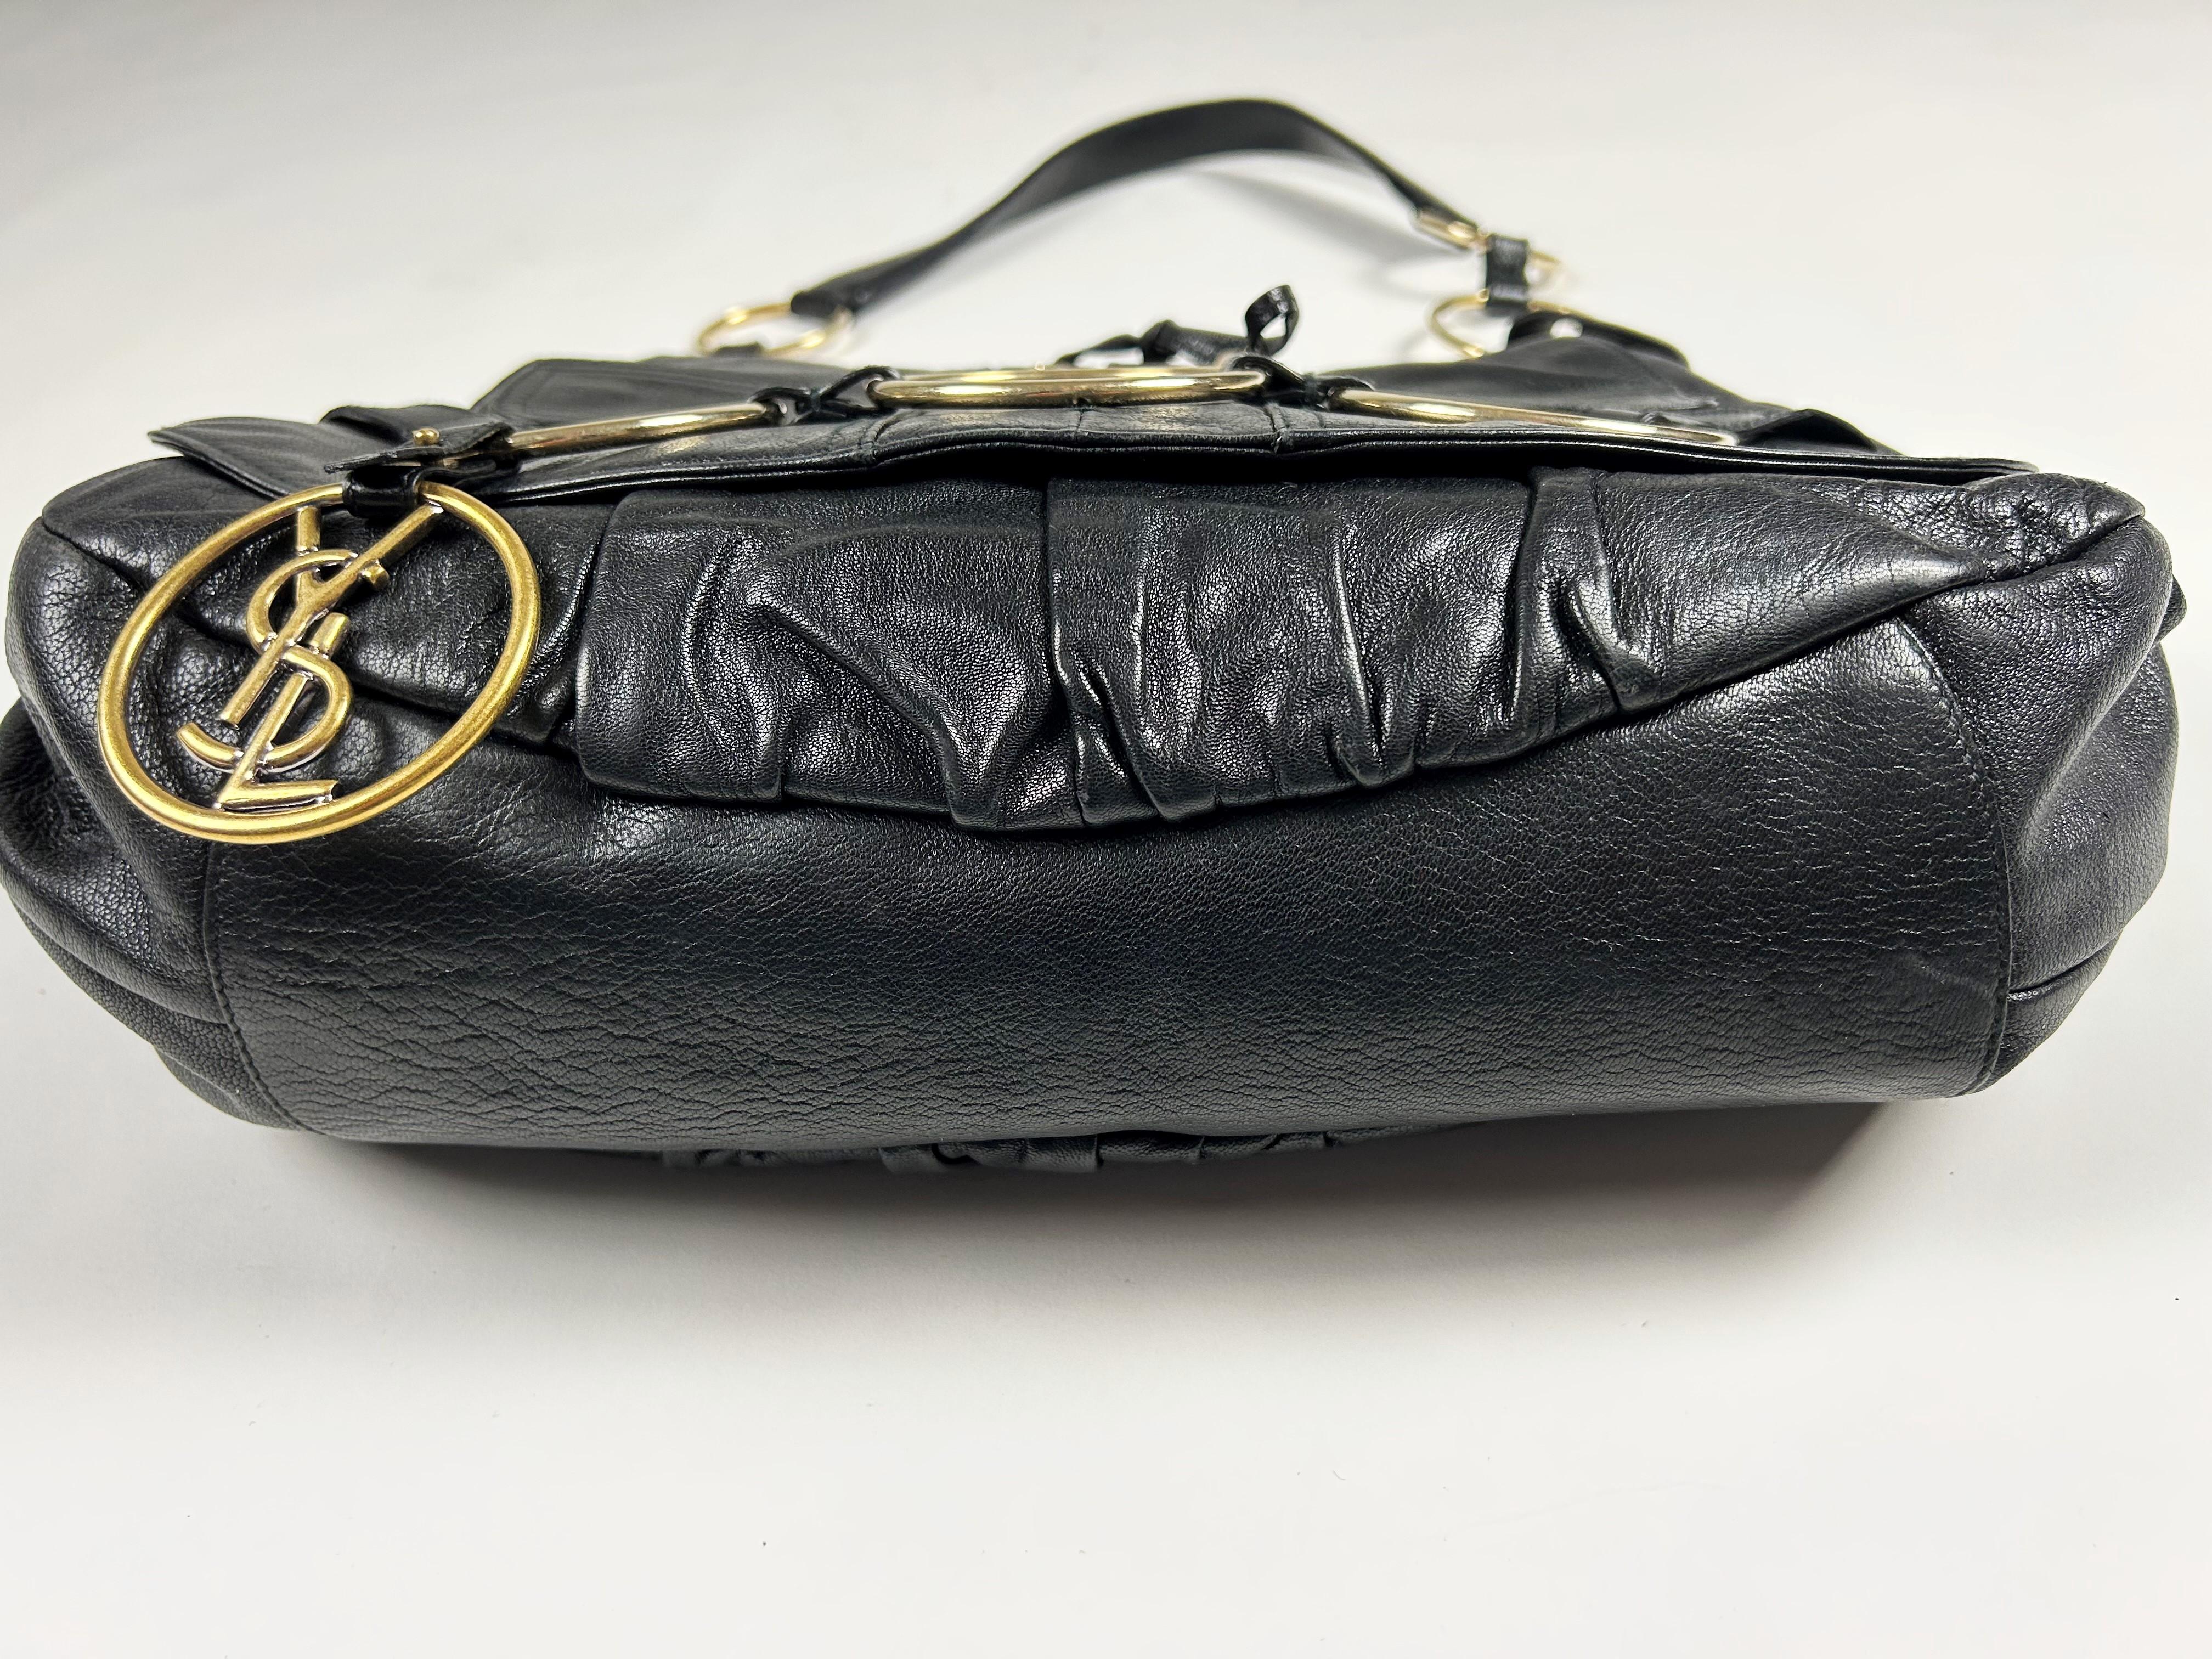 Circa 1980
France

Iconic black leather Saharienne bag signed Yves Saint Laurent Rive Gauche and dating from the 1980s. Besace shape with large flap with eyelets and crossed laces, two real patch pockets. Large golden brass rings, one with a large